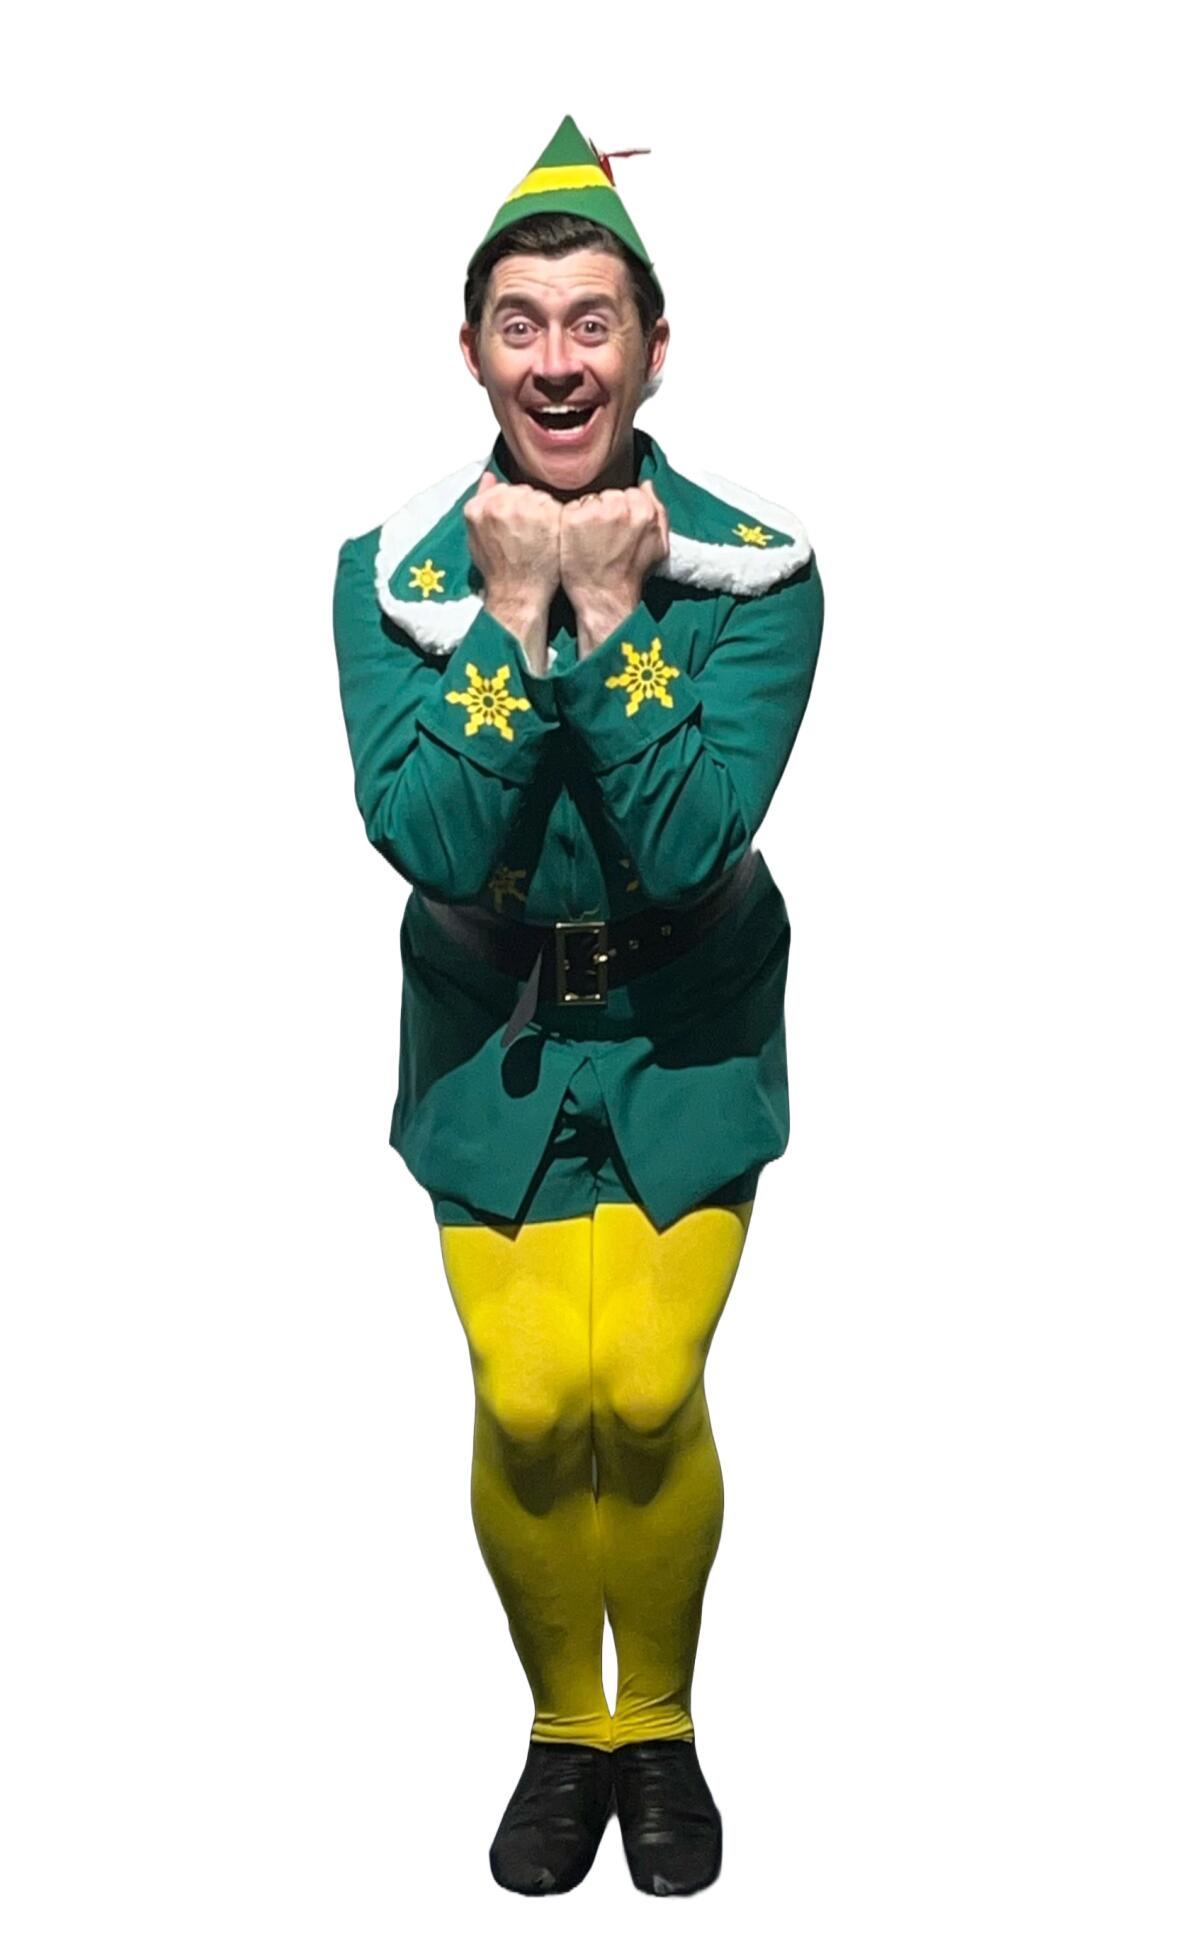 Bryan Banville plays Buddy the Elf in The Theatre at Welk's 